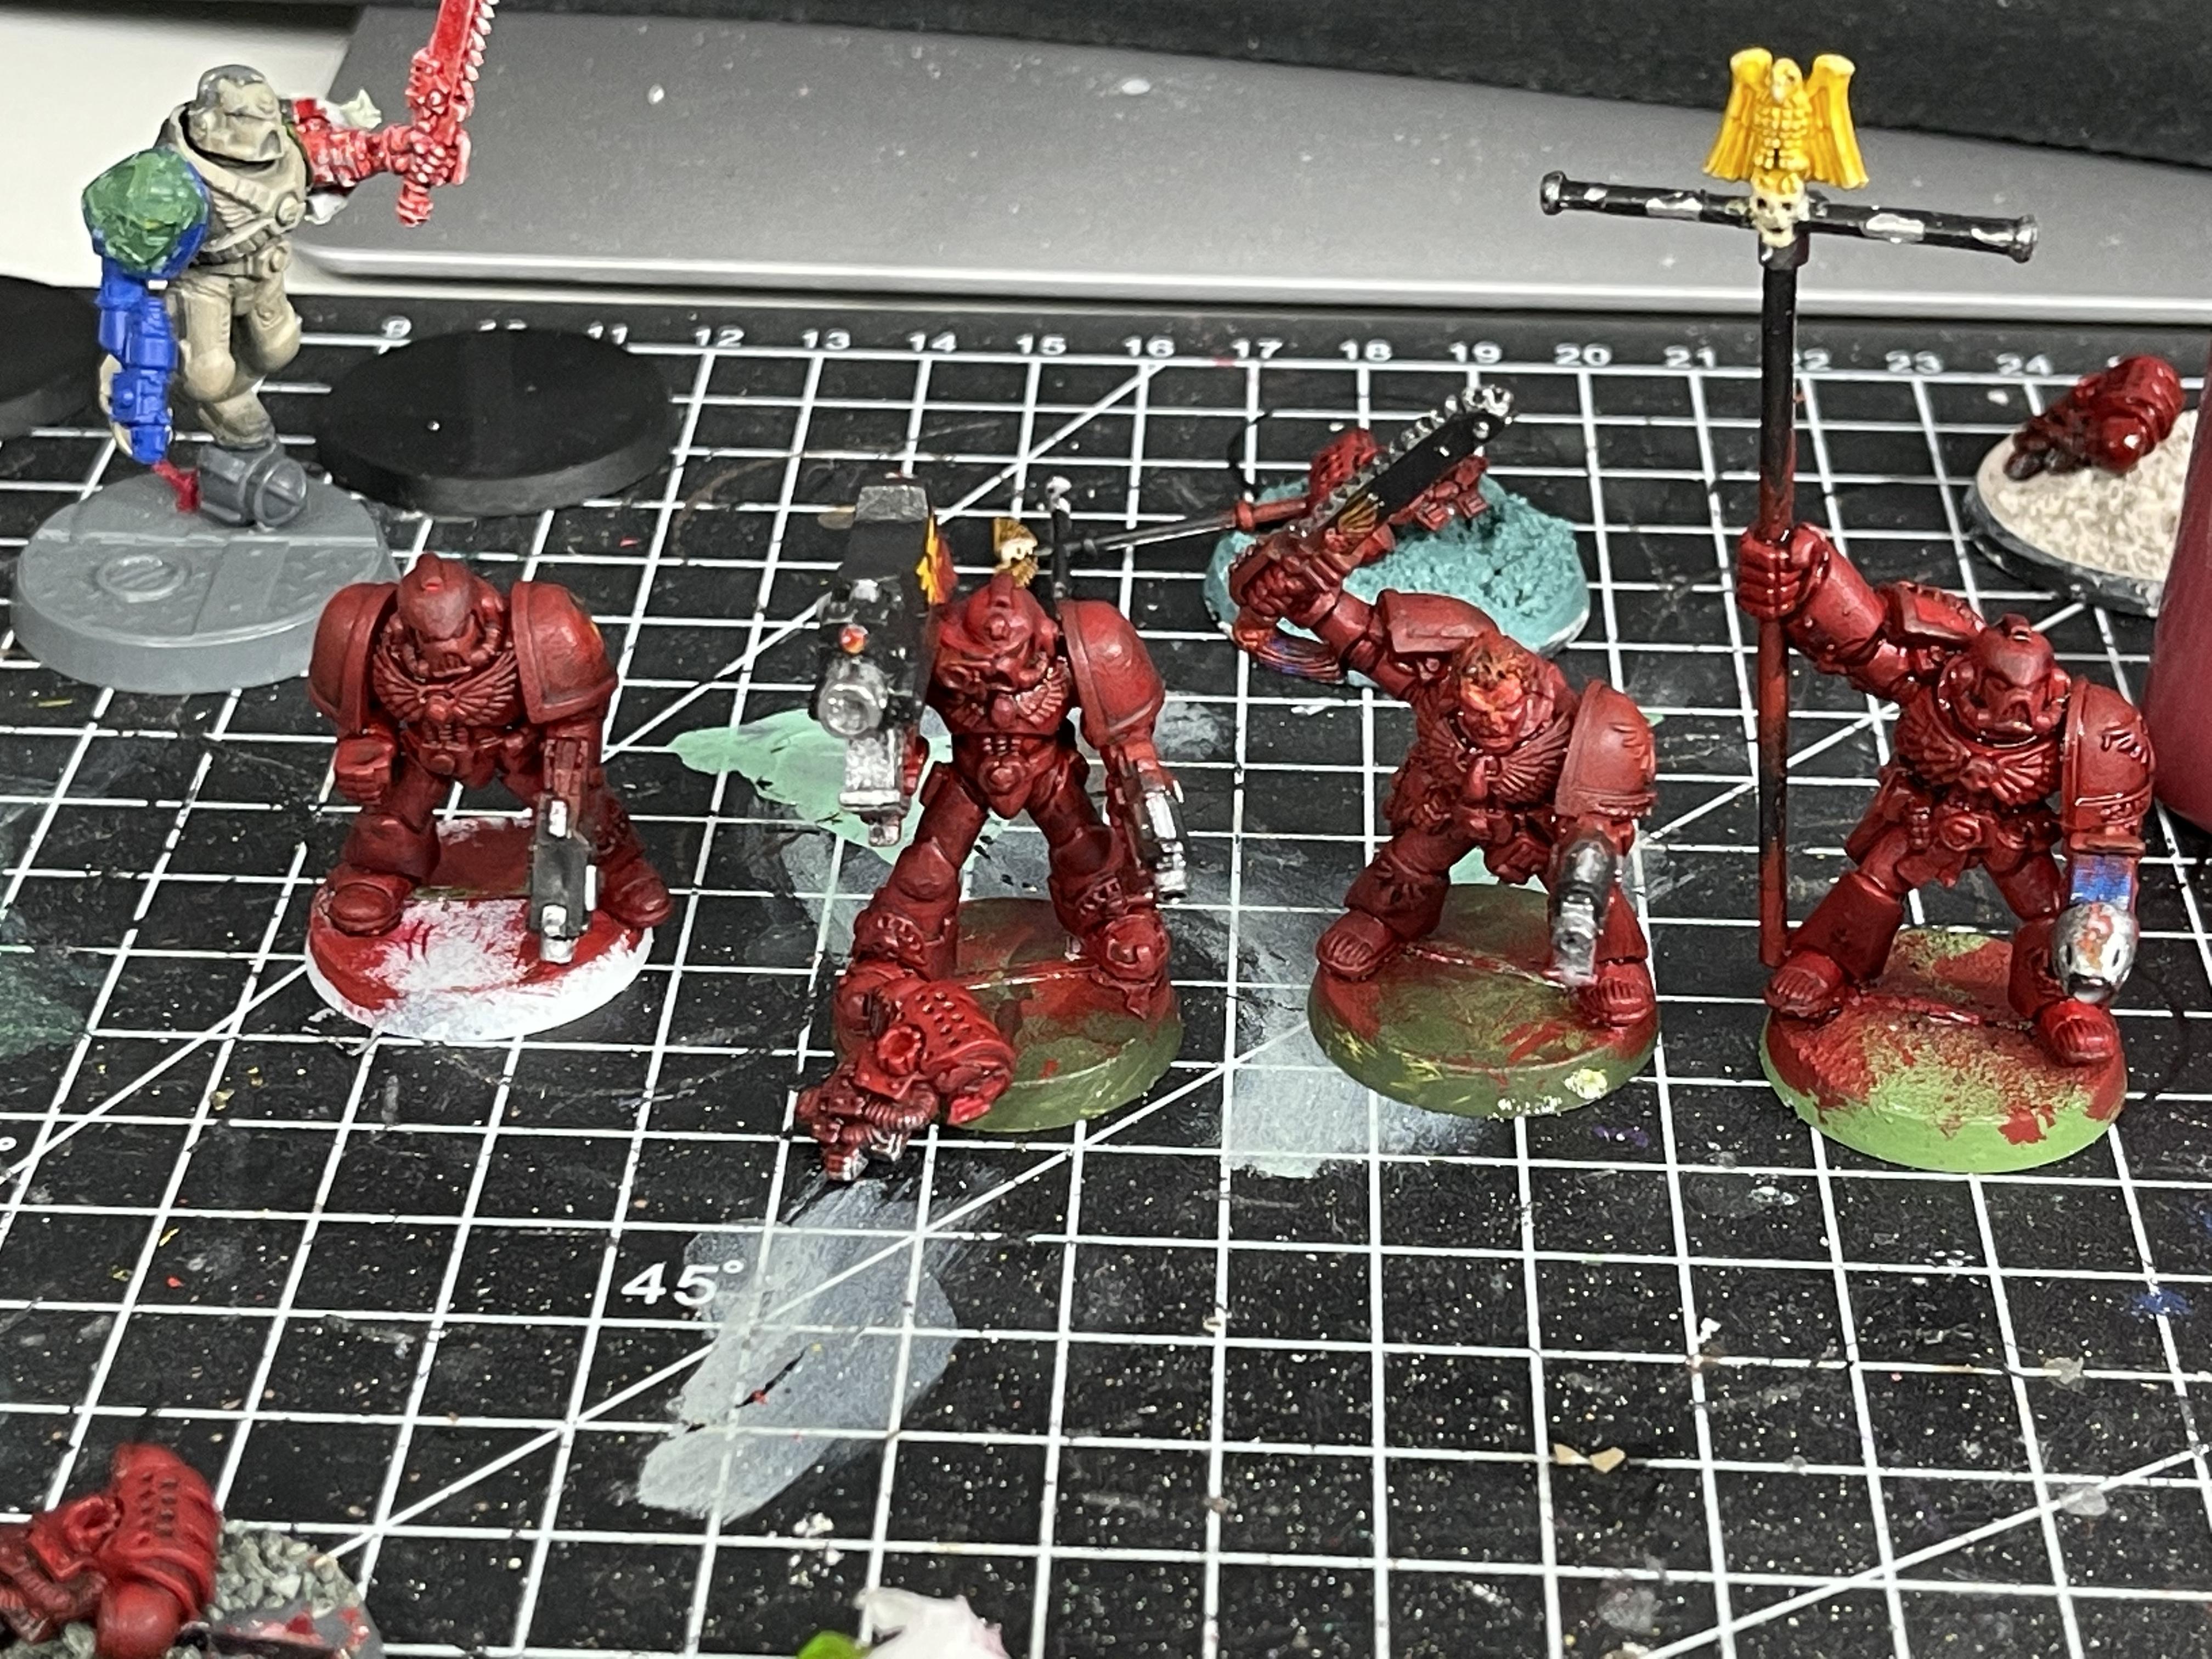 2nd Edition, Blood Angels, Space Marines, Tactical Squad, Warhammer 40,000, Work In Progress